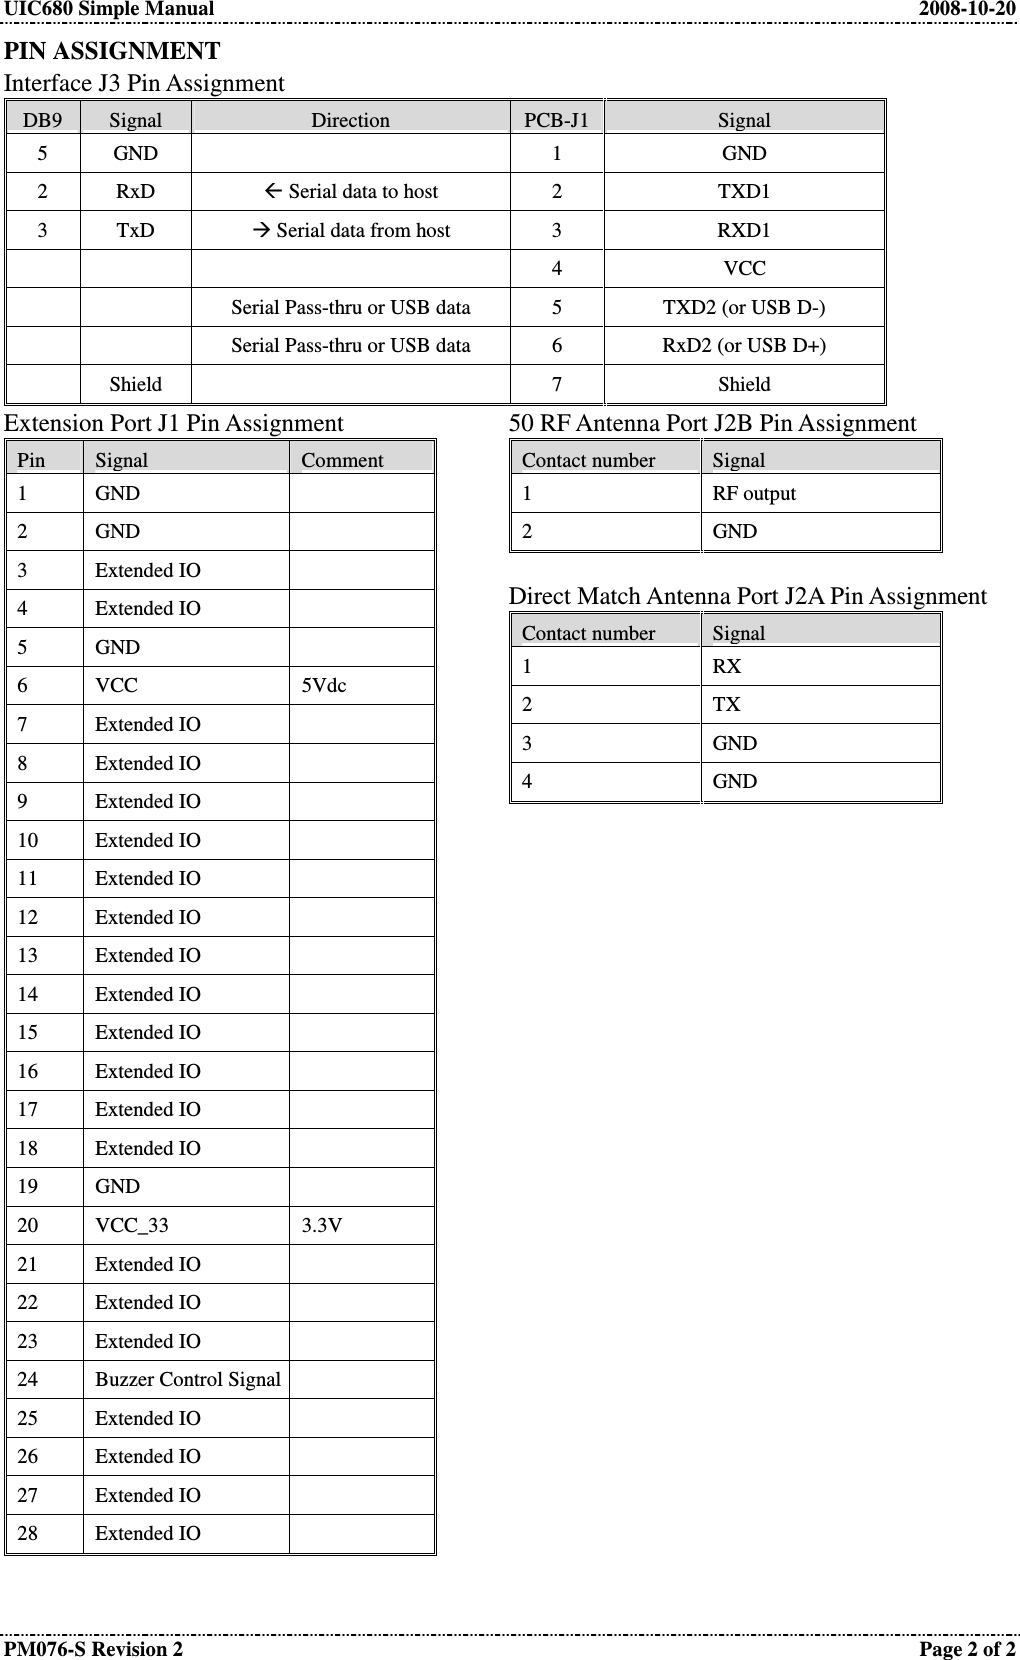 UIC680 Simple Manual  2008-10-20 PM076-S Revision 2  Page 2 of 2 PIN ASSIGNMENT Interface J3 Pin Assignment DB9 Signal Direction PCB-J1 Signal 5  GND    1  GND 2  RxD   Serial data to host  2  TXD1 3  TxD   Serial data from host  3  RXD1       4  VCC     Serial Pass-thru or USB data  5  TXD2 (or USB D-)     Serial Pass-thru or USB data  6  RxD2 (or USB D+)   Shield    7  Shield  Extension Port J1 Pin Assignment Pin Signal Comment 1  GND   2  GND   3  Extended IO   4  Extended IO   5  GND   6  VCC  5Vdc 7  Extended IO   8  Extended IO   9  Extended IO   10  Extended IO   11  Extended IO   12  Extended IO   13  Extended IO   14  Extended IO   15  Extended IO   16  Extended IO   17  Extended IO   18  Extended IO   19  GND   20  VCC_33  3.3V 21  Extended IO   22  Extended IO   23  Extended IO   24  Buzzer Control Signal  25  Extended IO   26  Extended IO   27  Extended IO   28  Extended IO    50 RF Antenna Port J2B Pin Assignment Contact number Signal 1  RF output 2  GND  Direct Match Antenna Port J2A Pin Assignment Contact number Signal 1  RX 2  TX 3  GND 4  GND   